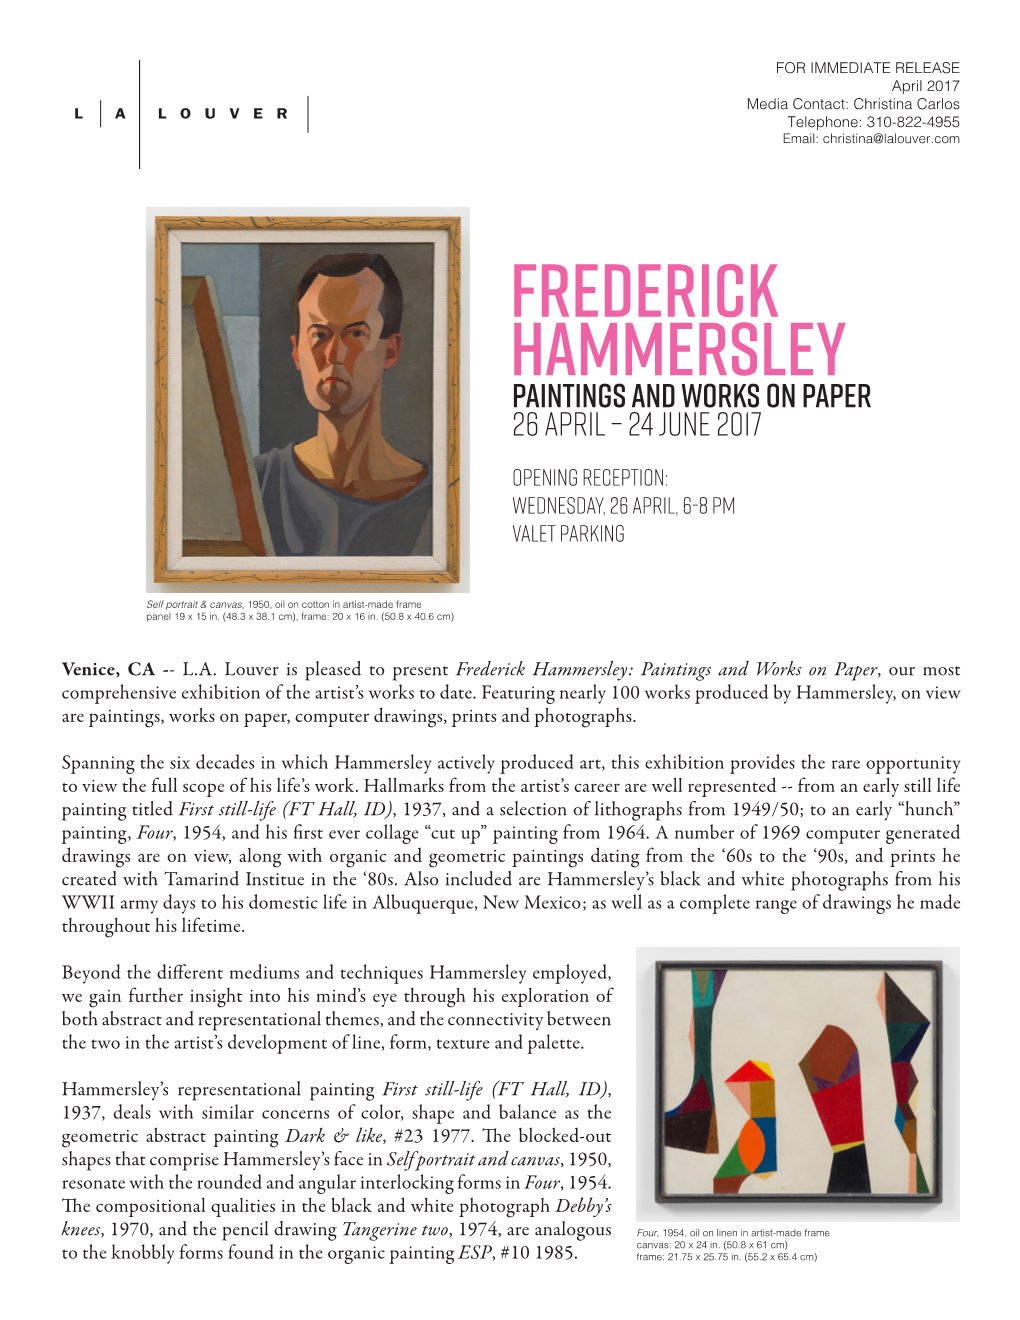 Frederick Hammersley Paintings and Works on Paper 26 April – 24 June 2017